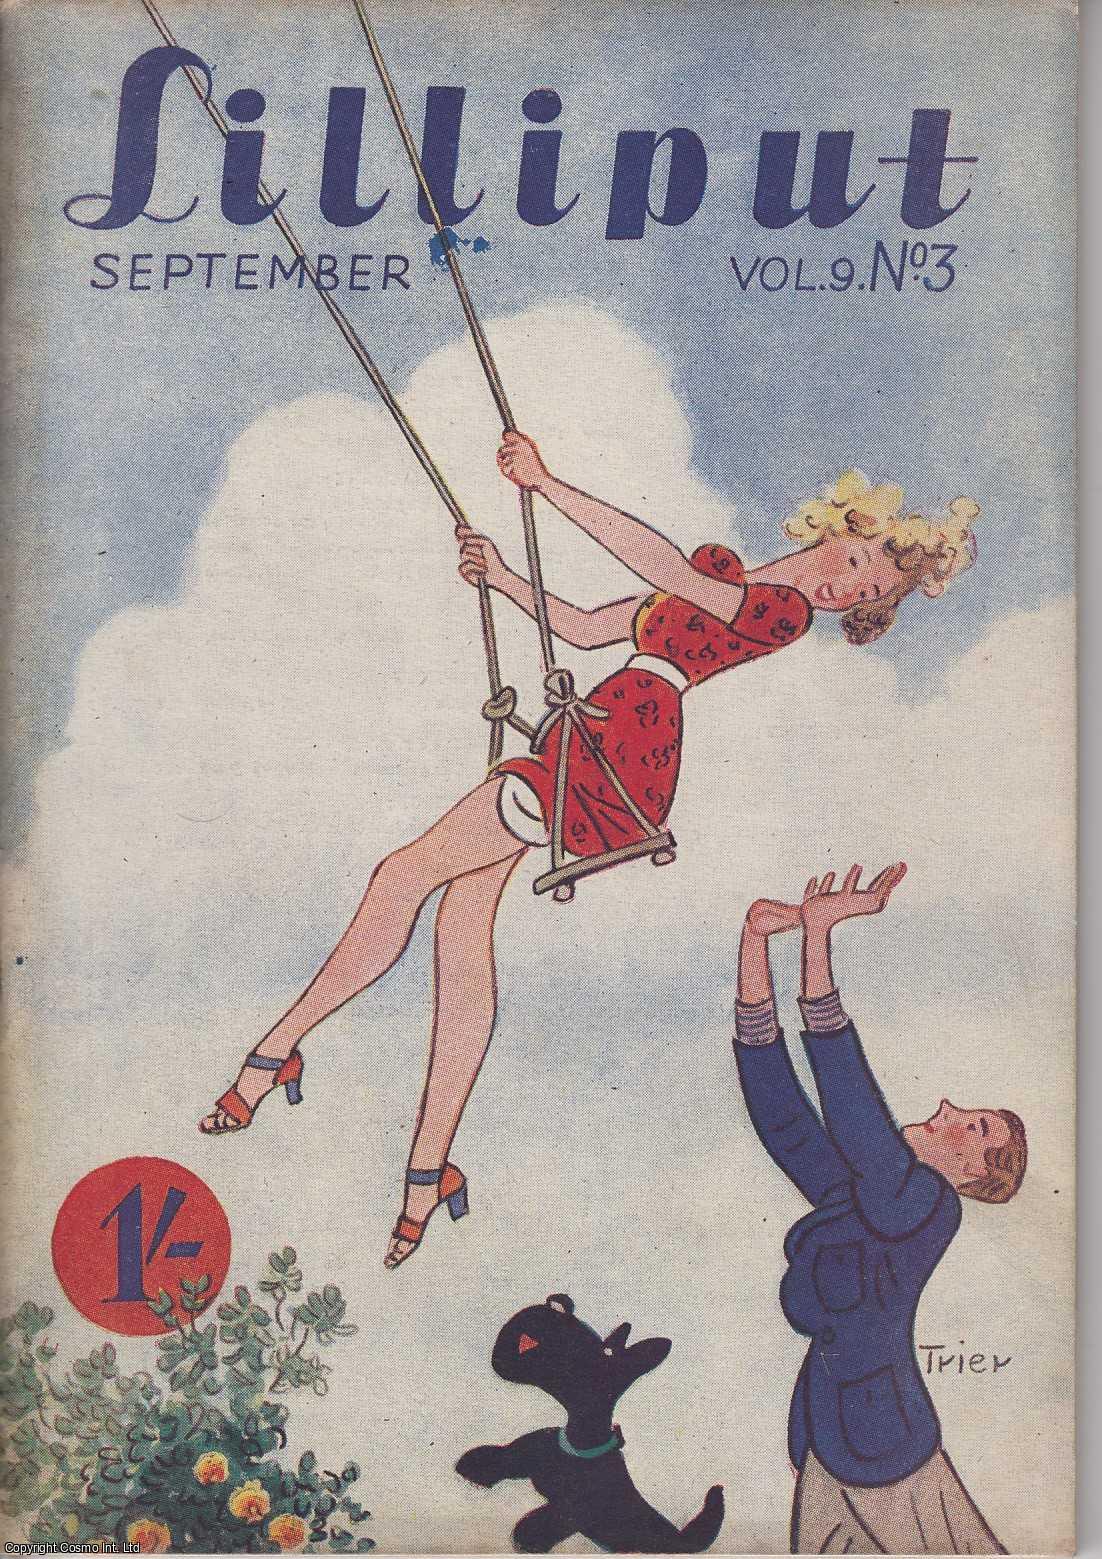 Lilliput - Lilliput Magazine. September 1941. Vol.9 no.3 Issue no.51. Julian Huxley, Lesley Osmond, W. Swain, and other pieces.